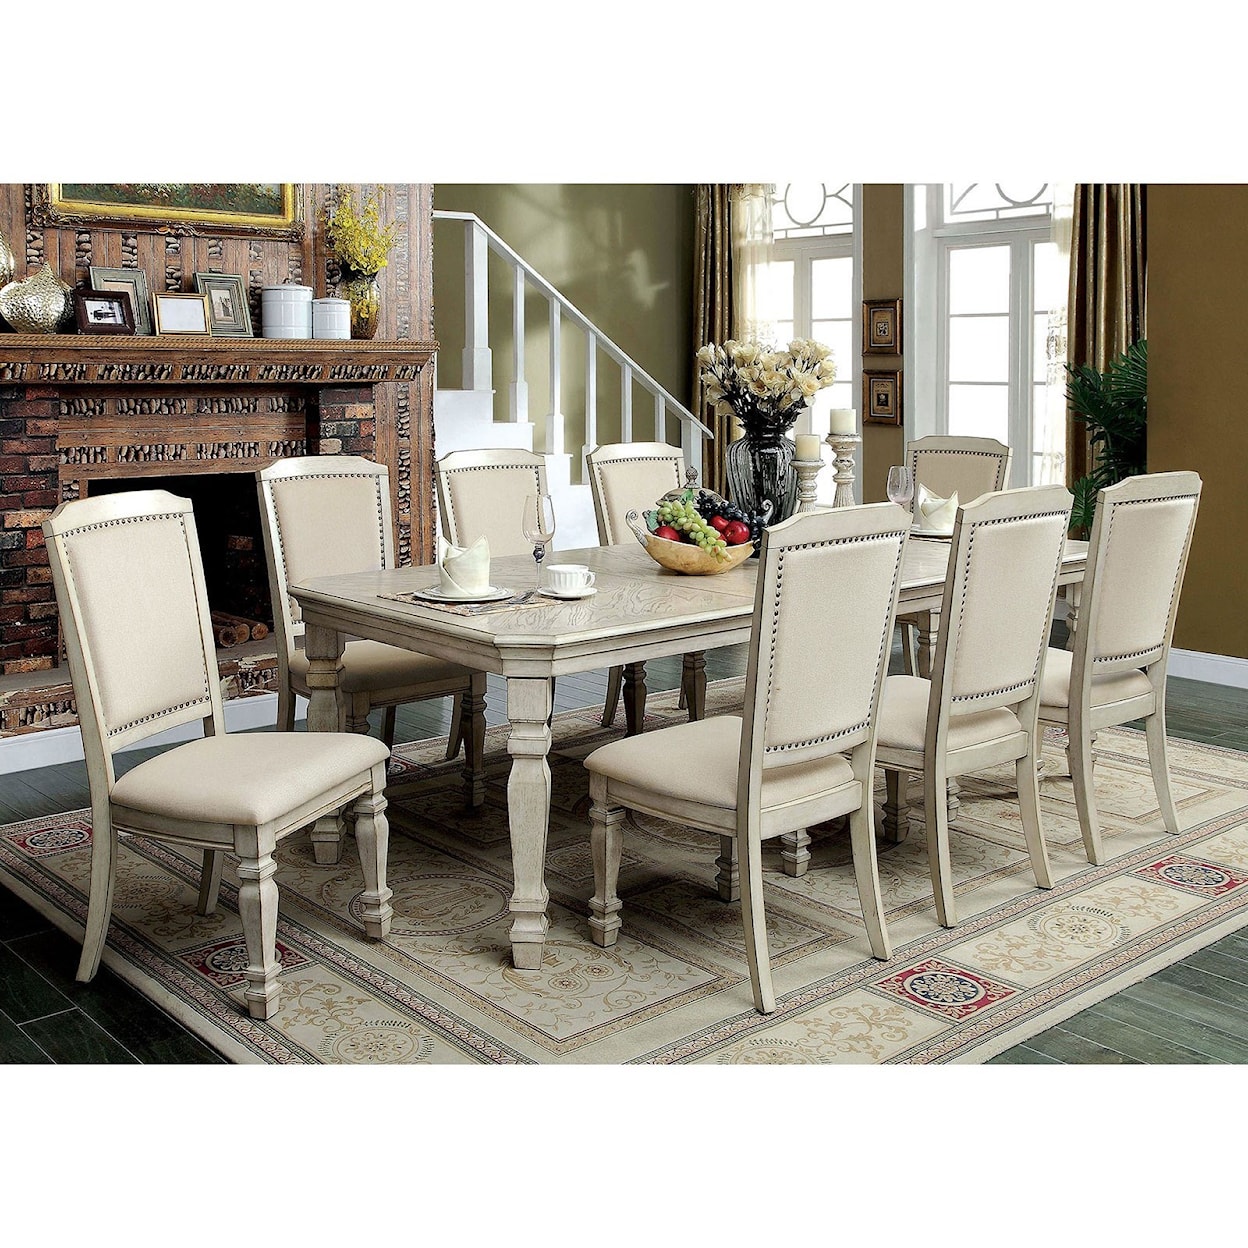 Furniture of America Holcroft Table and 8 Chairs